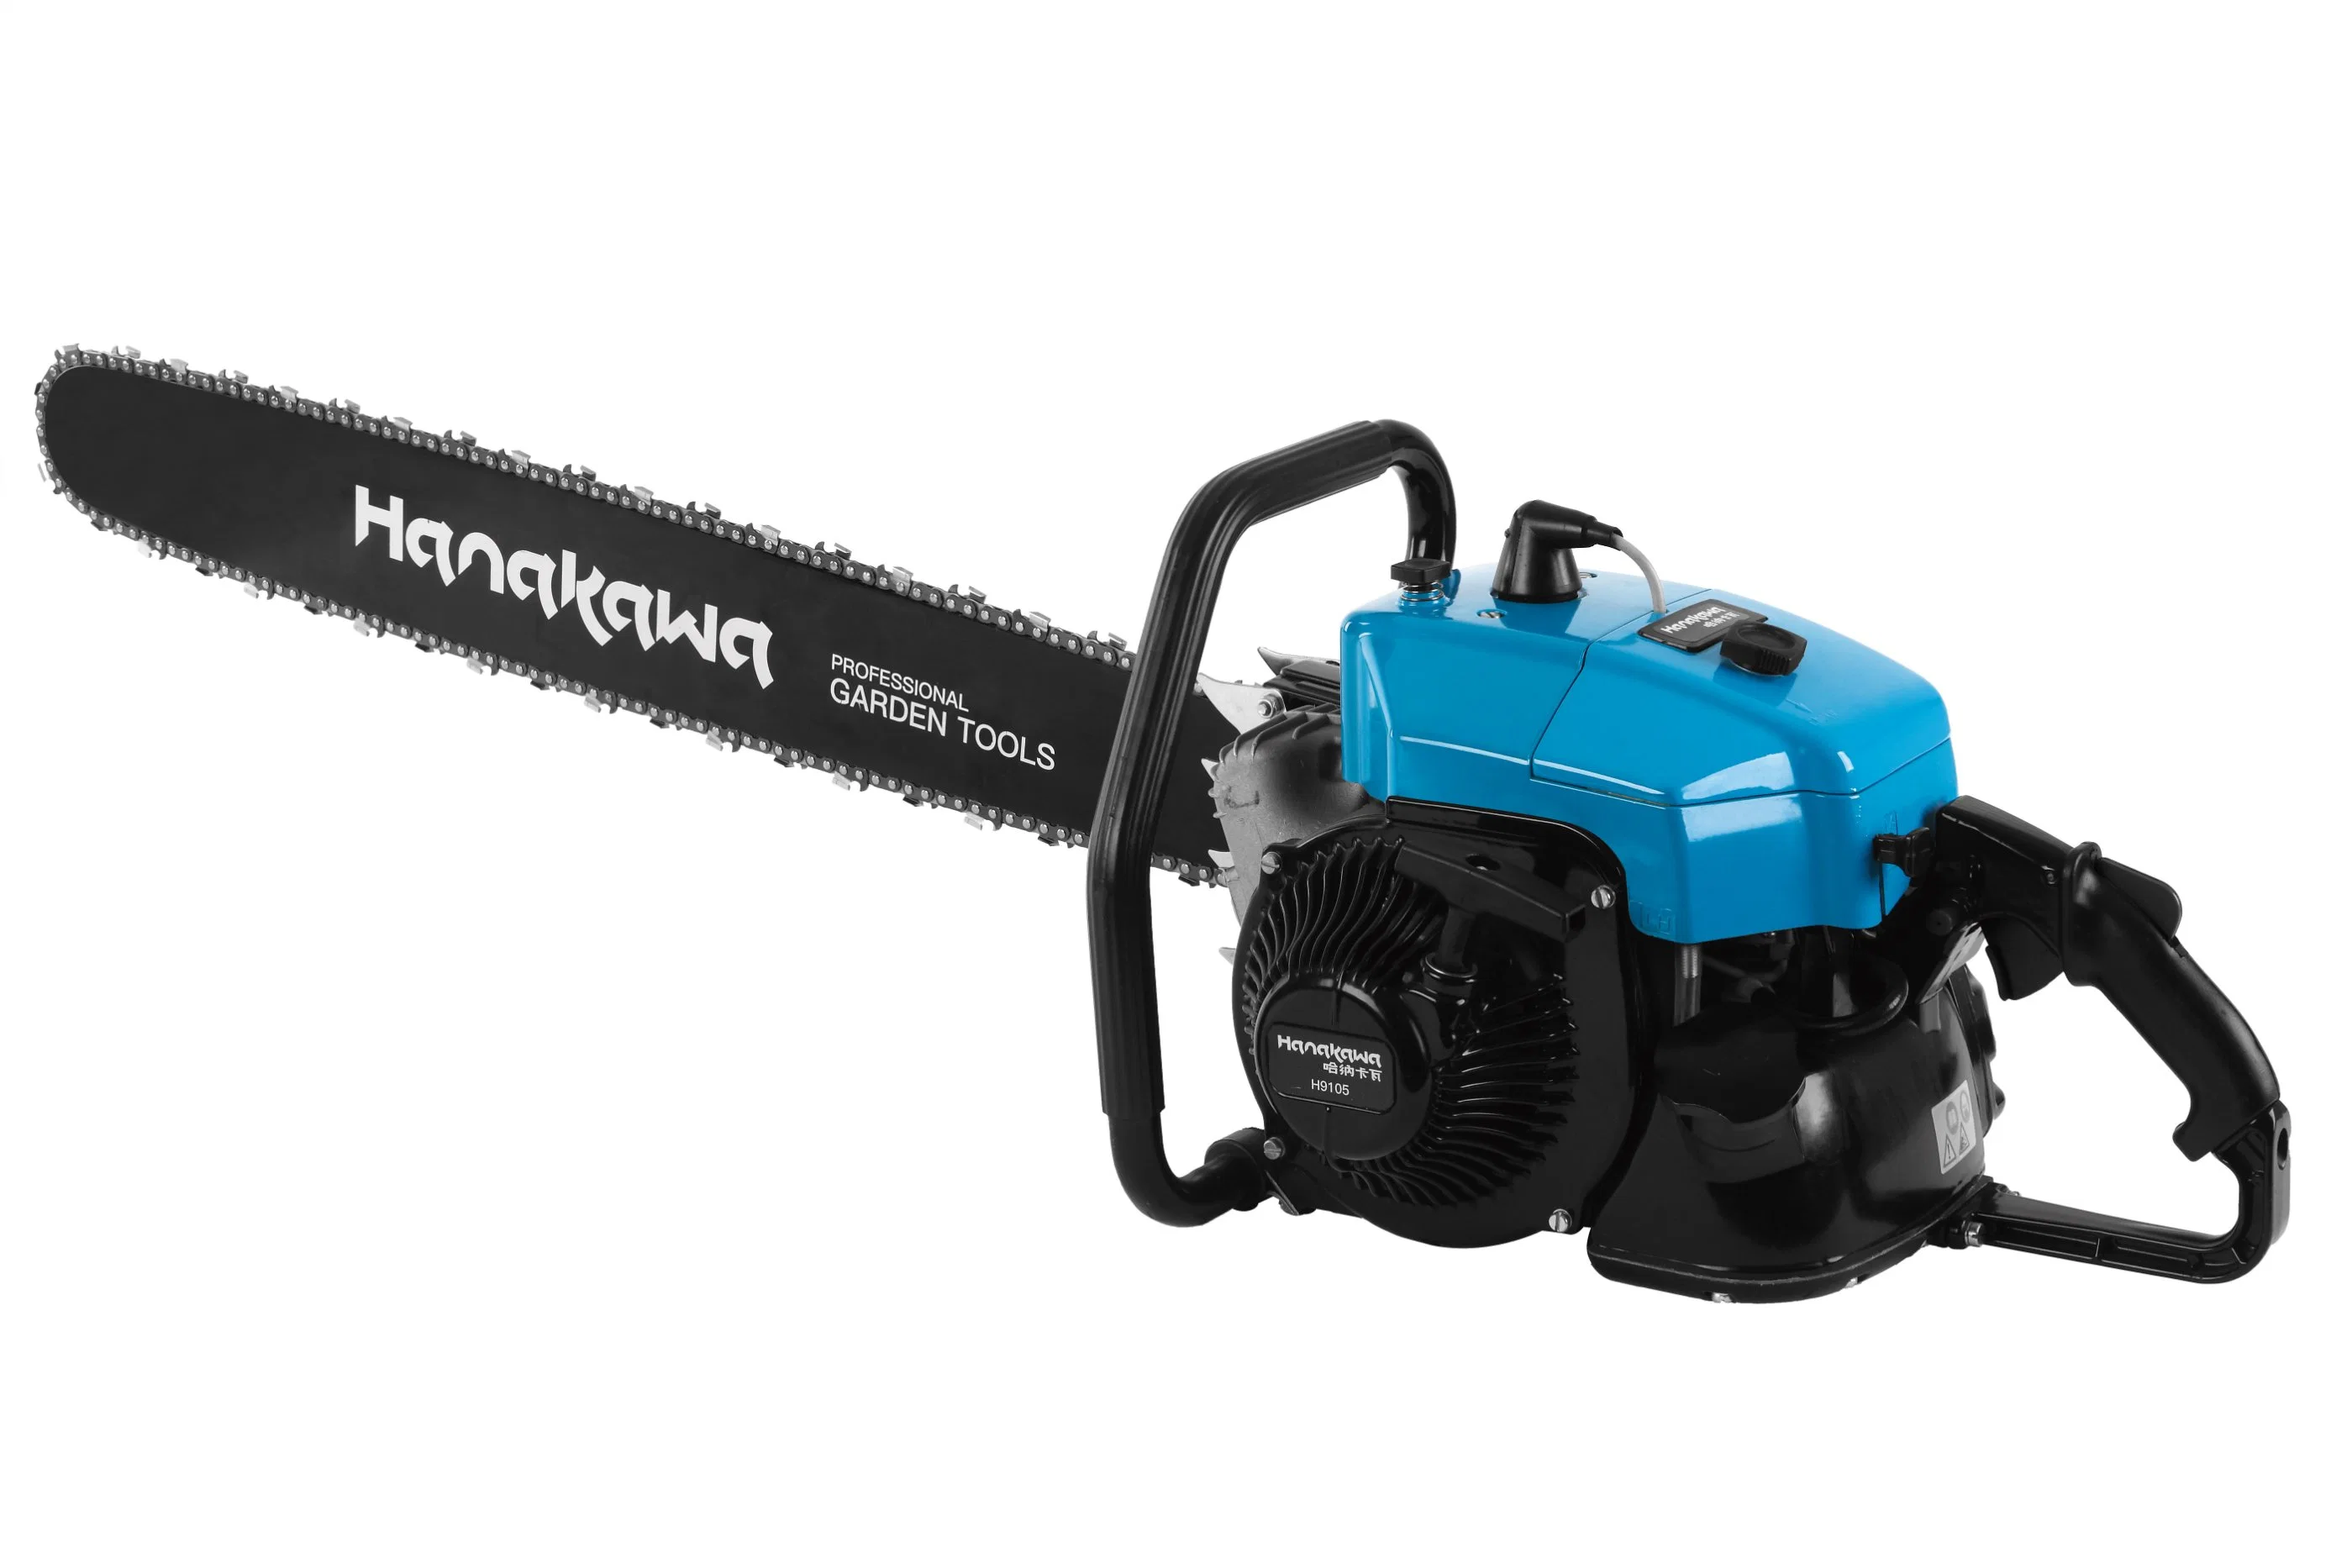 Hanakawa H9105 (070) 105.7cc Chainsaw Gas Powered 36inch with Tool Kit 2-Cycle Withstand Tree Limbing Pruning Cutting Wood Farm Trimming Tasks Handed